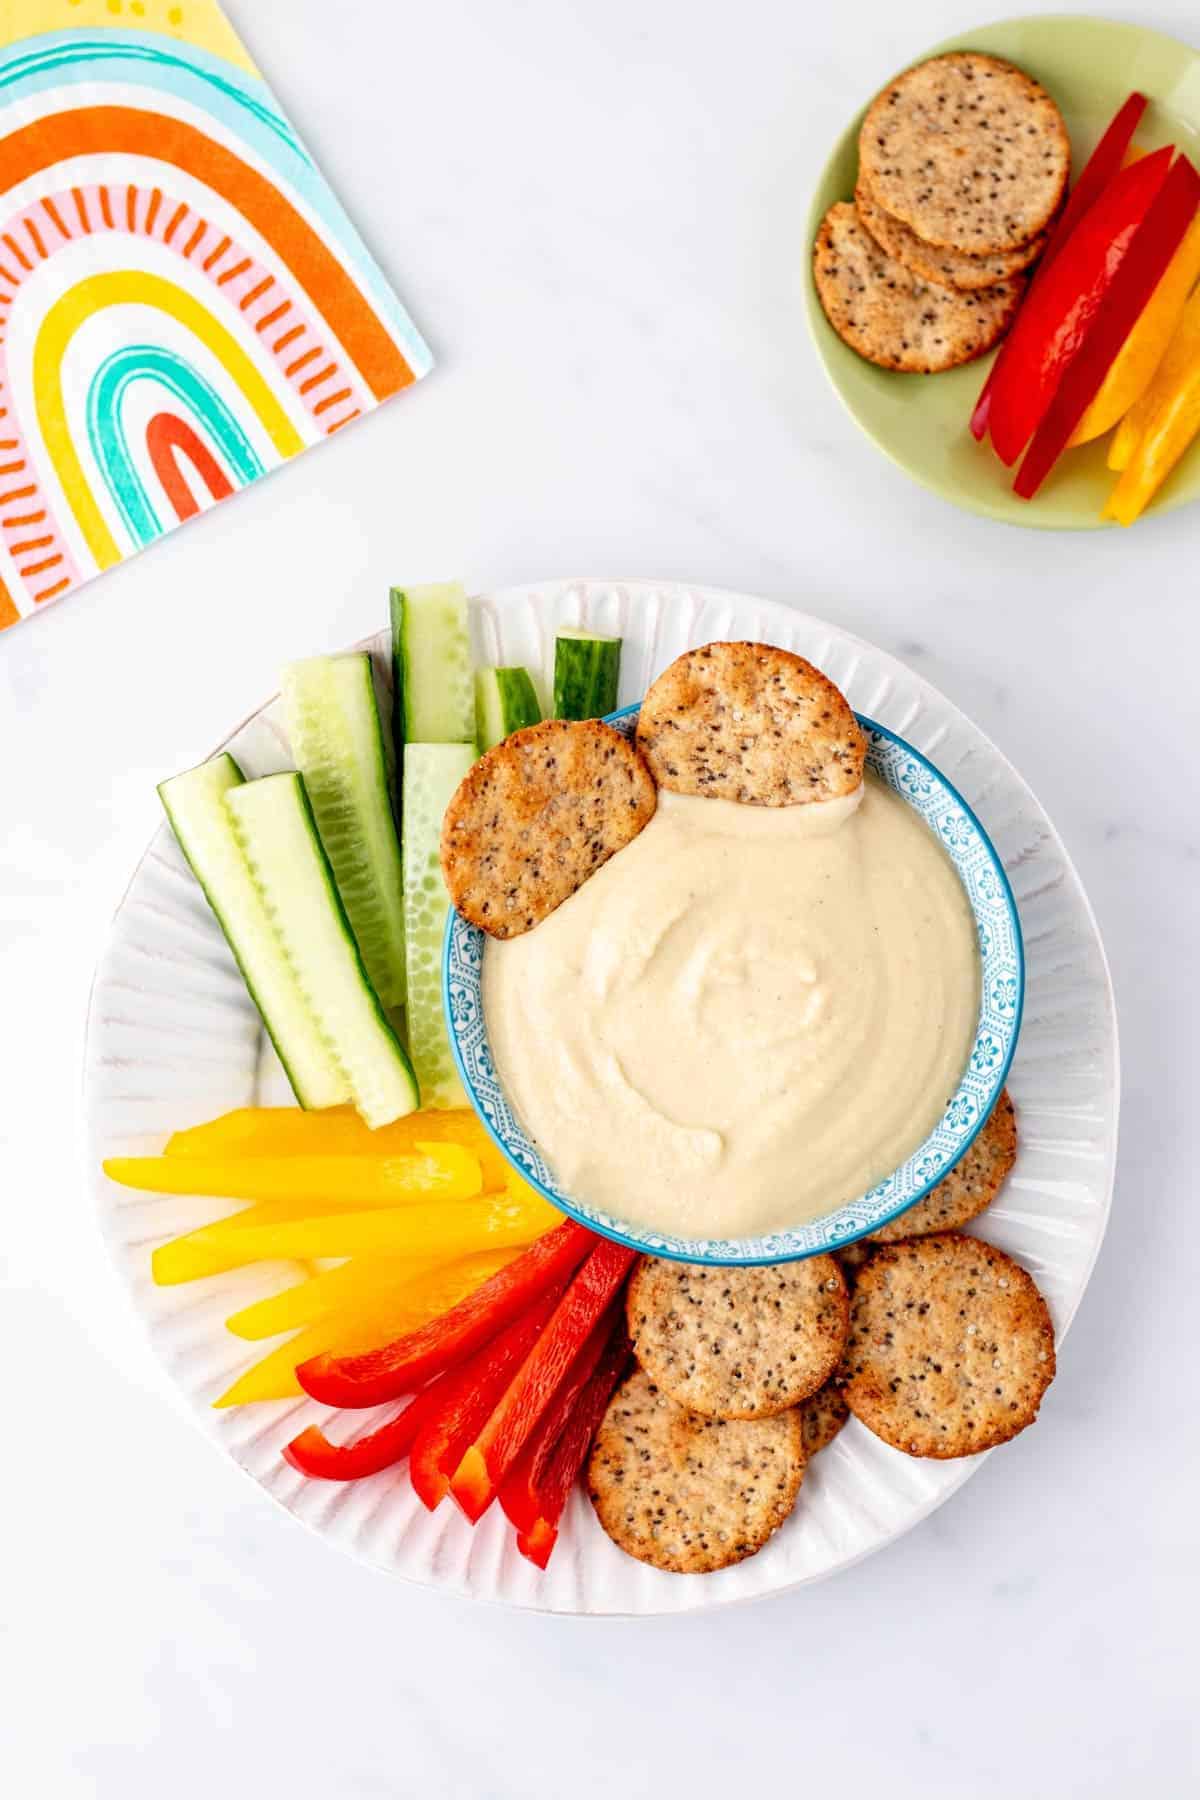 A plate of veggies and crackers with a bowl of high protein hummus.